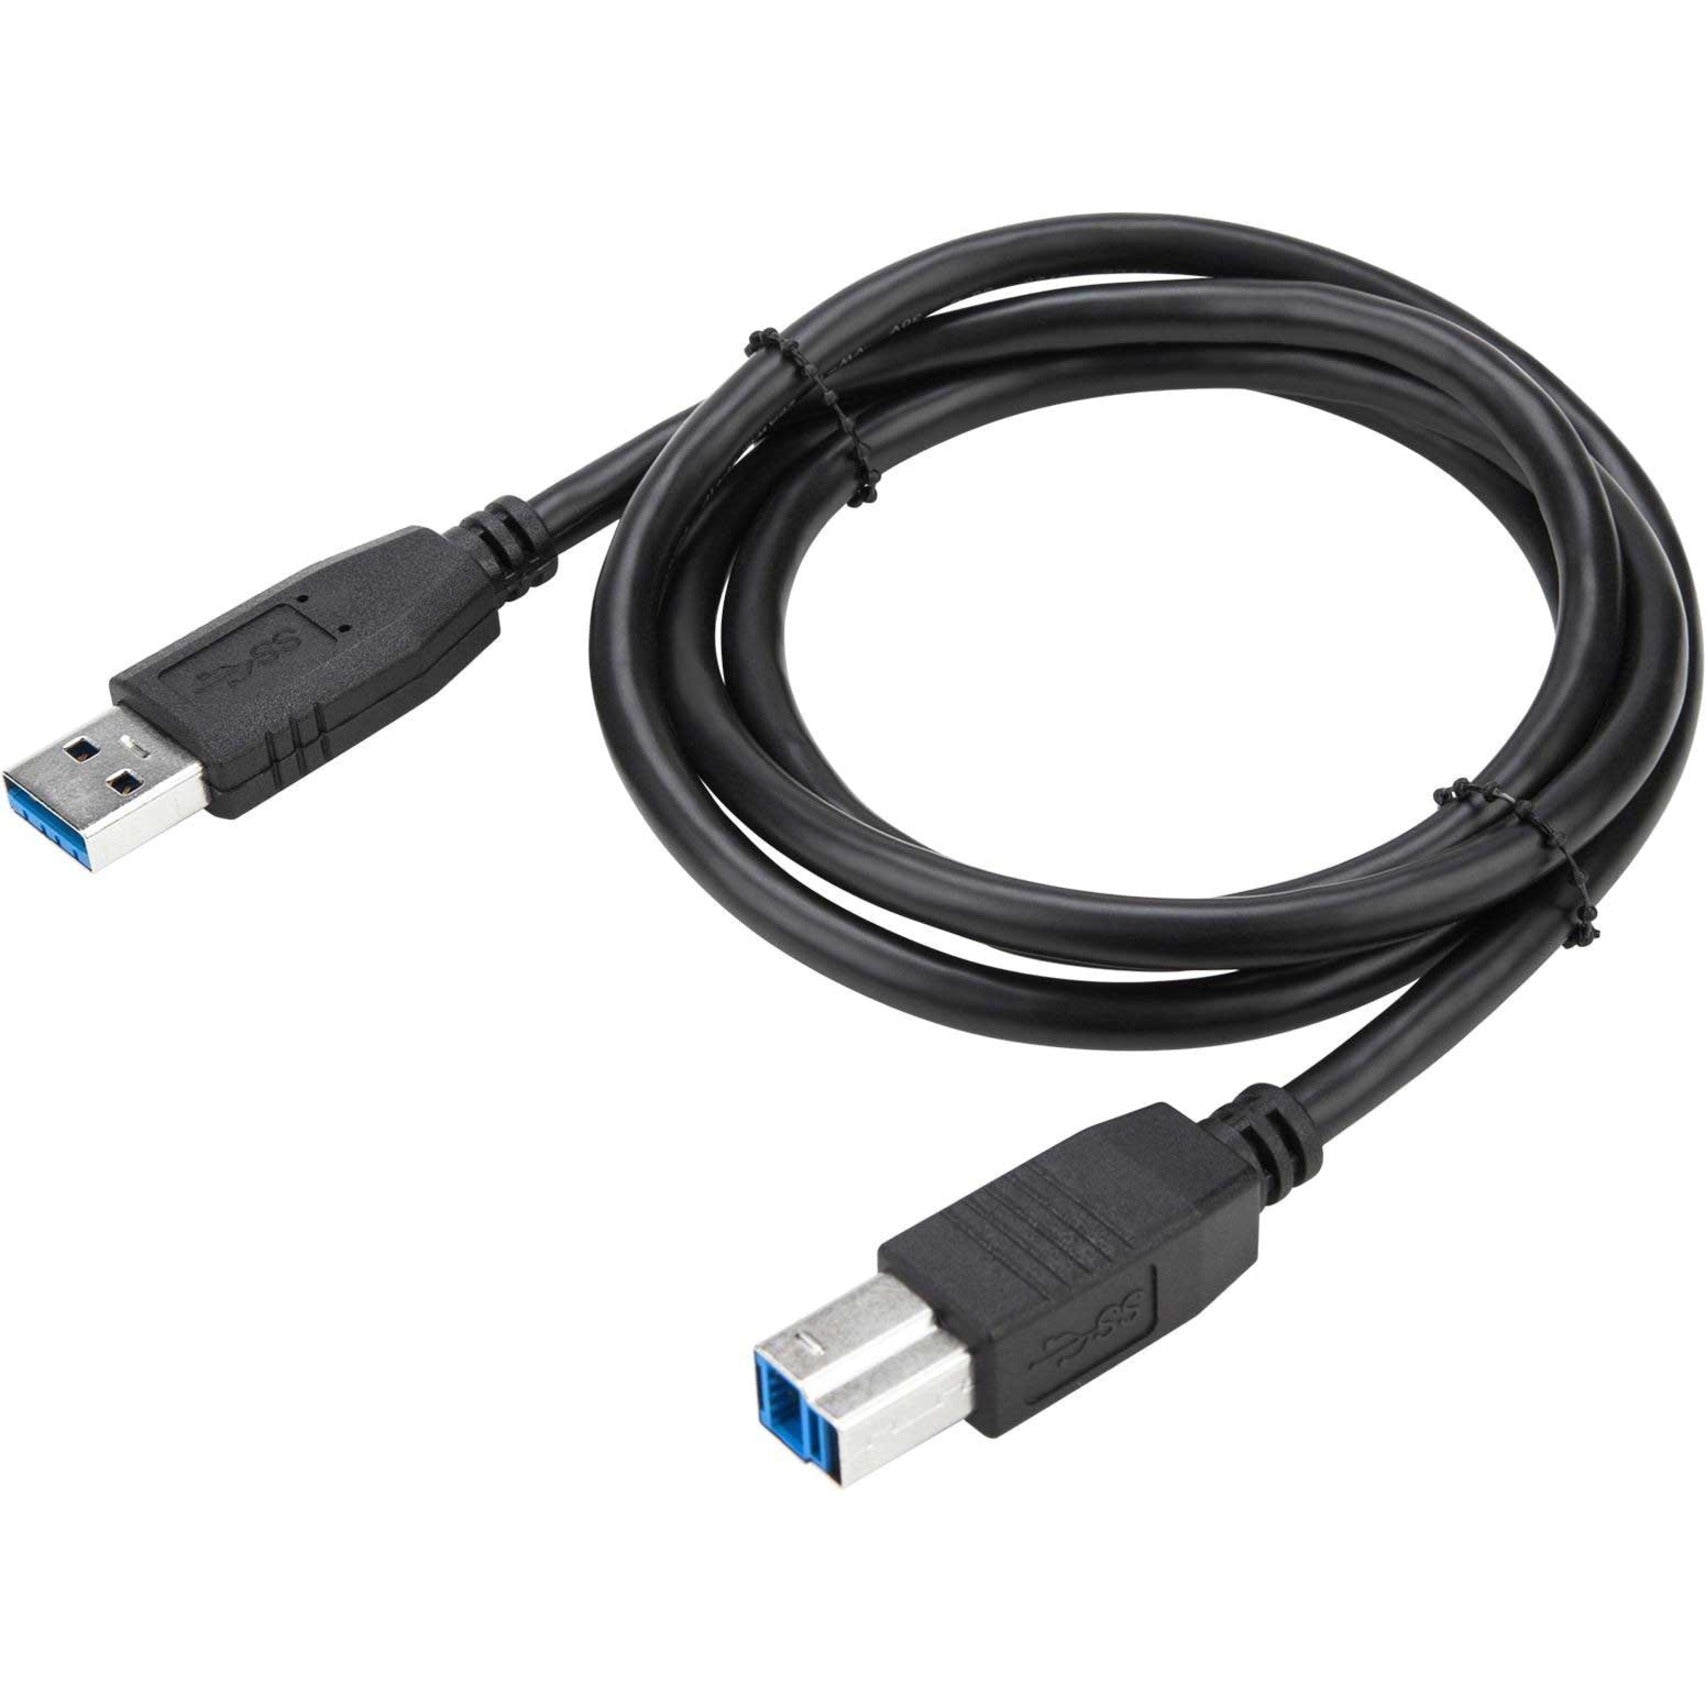 Targus ACC987USX 1-Meter USB 3.0 A to B Cable, Fast Data Transfer and Universal Compatibility